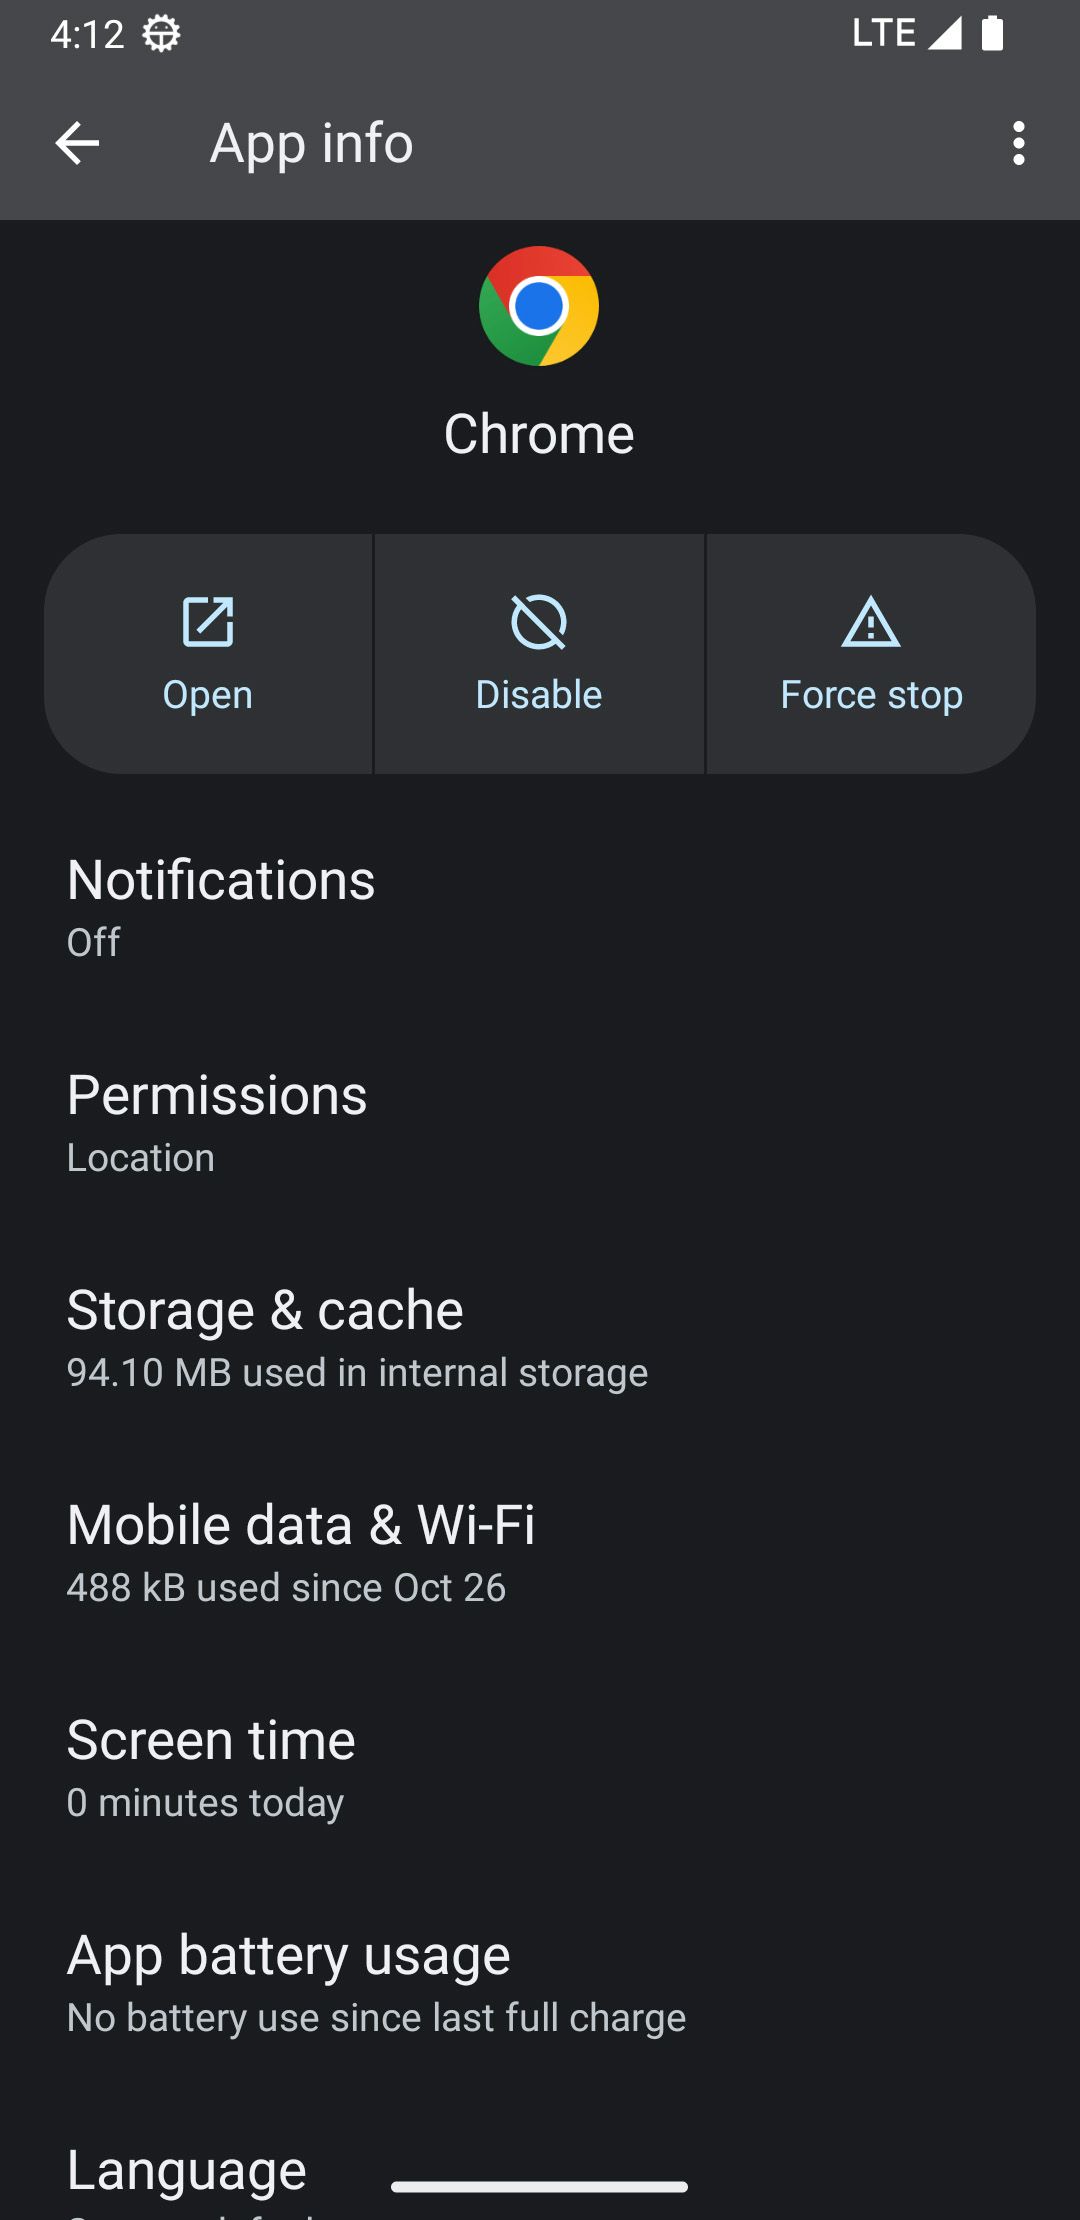 Battery usage option in the app's info section